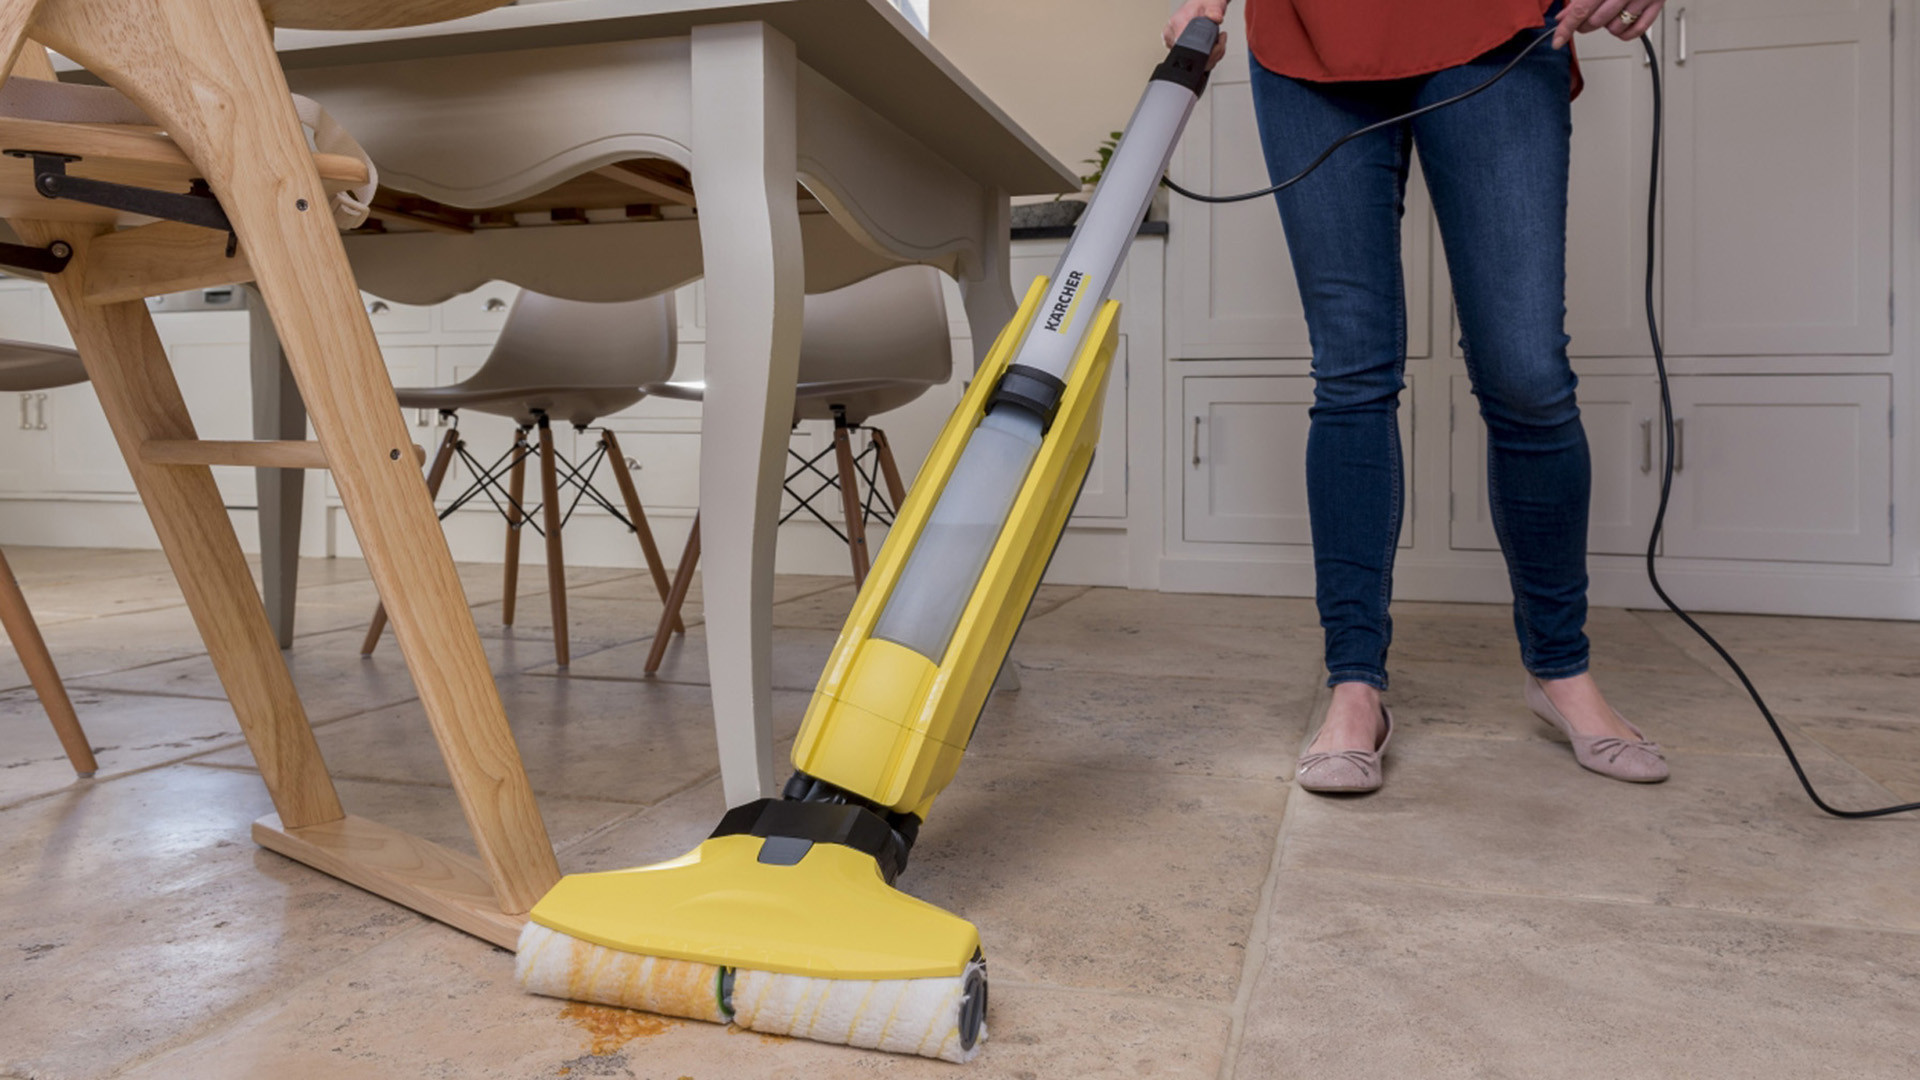 16 Recommended Best Vacuums for Hardwood Floors 2016 2024 free download best vacuums for hardwood floors 2016 of karcher fc5 hard floor cleaner review trusted reviews with regard to karcher fc5 5 1